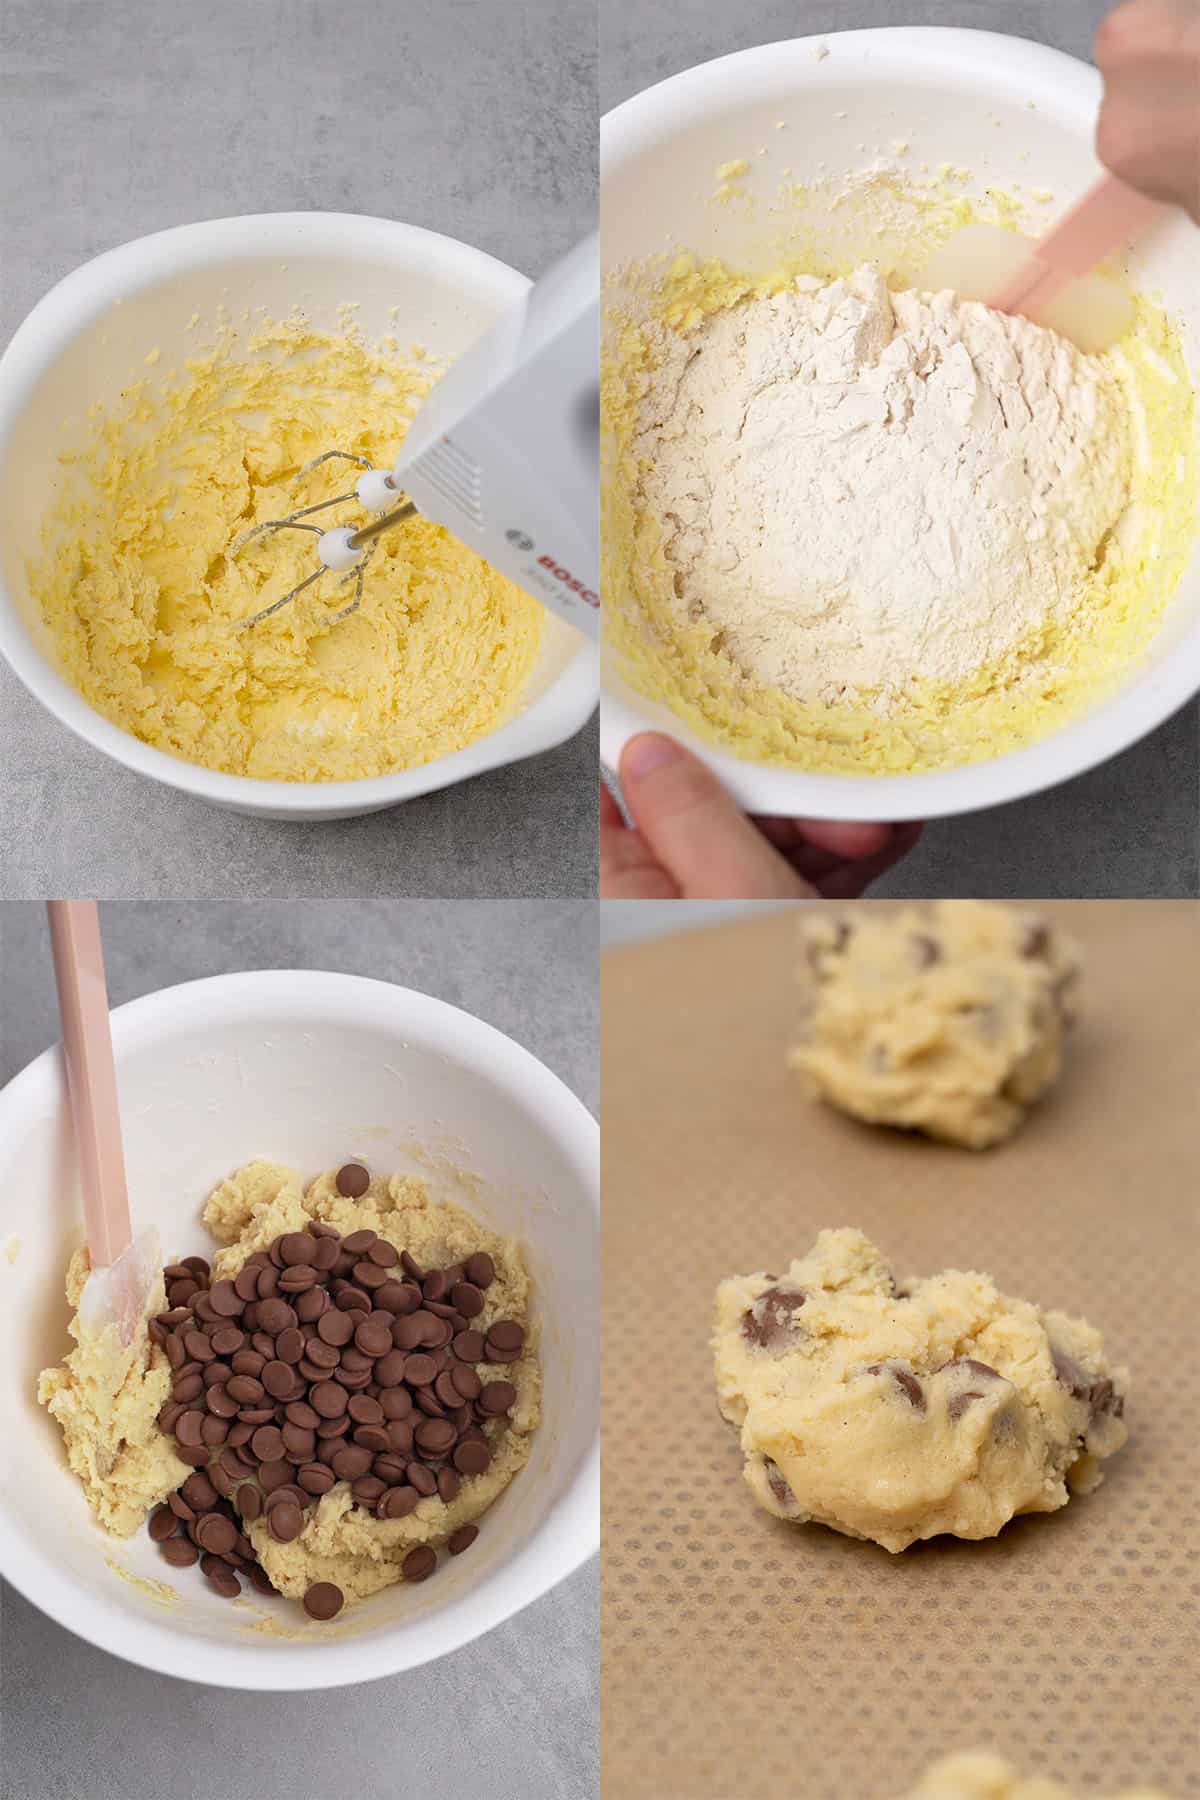 Chocolate chip cookies without brown sugar step-by-step process.